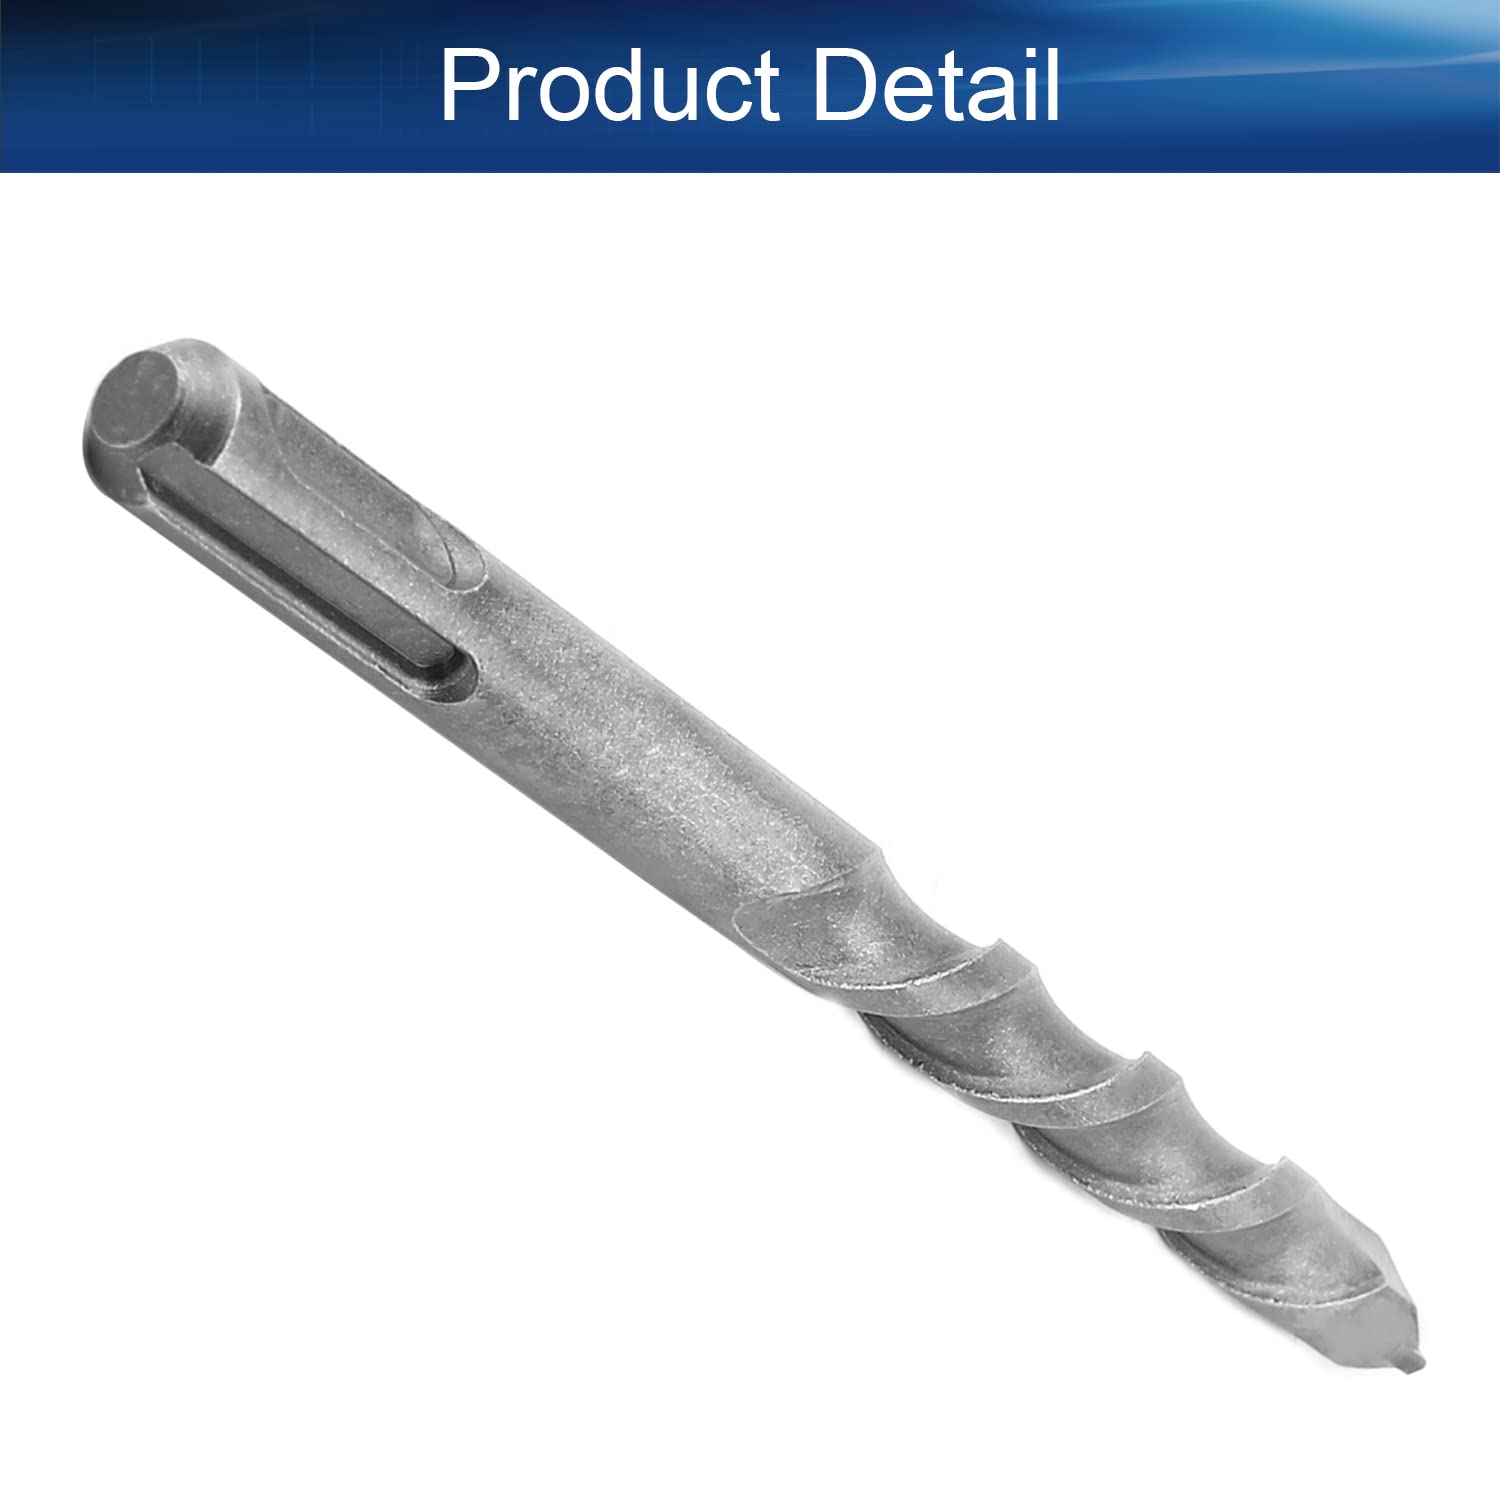 Auniwaig 12mm x 150mm Rotary Hammer Drill Bit, Masonry Drill Carbide Tipped Rotary Hammer Bit Round Shank, for SDS Impact Drill 1Pc